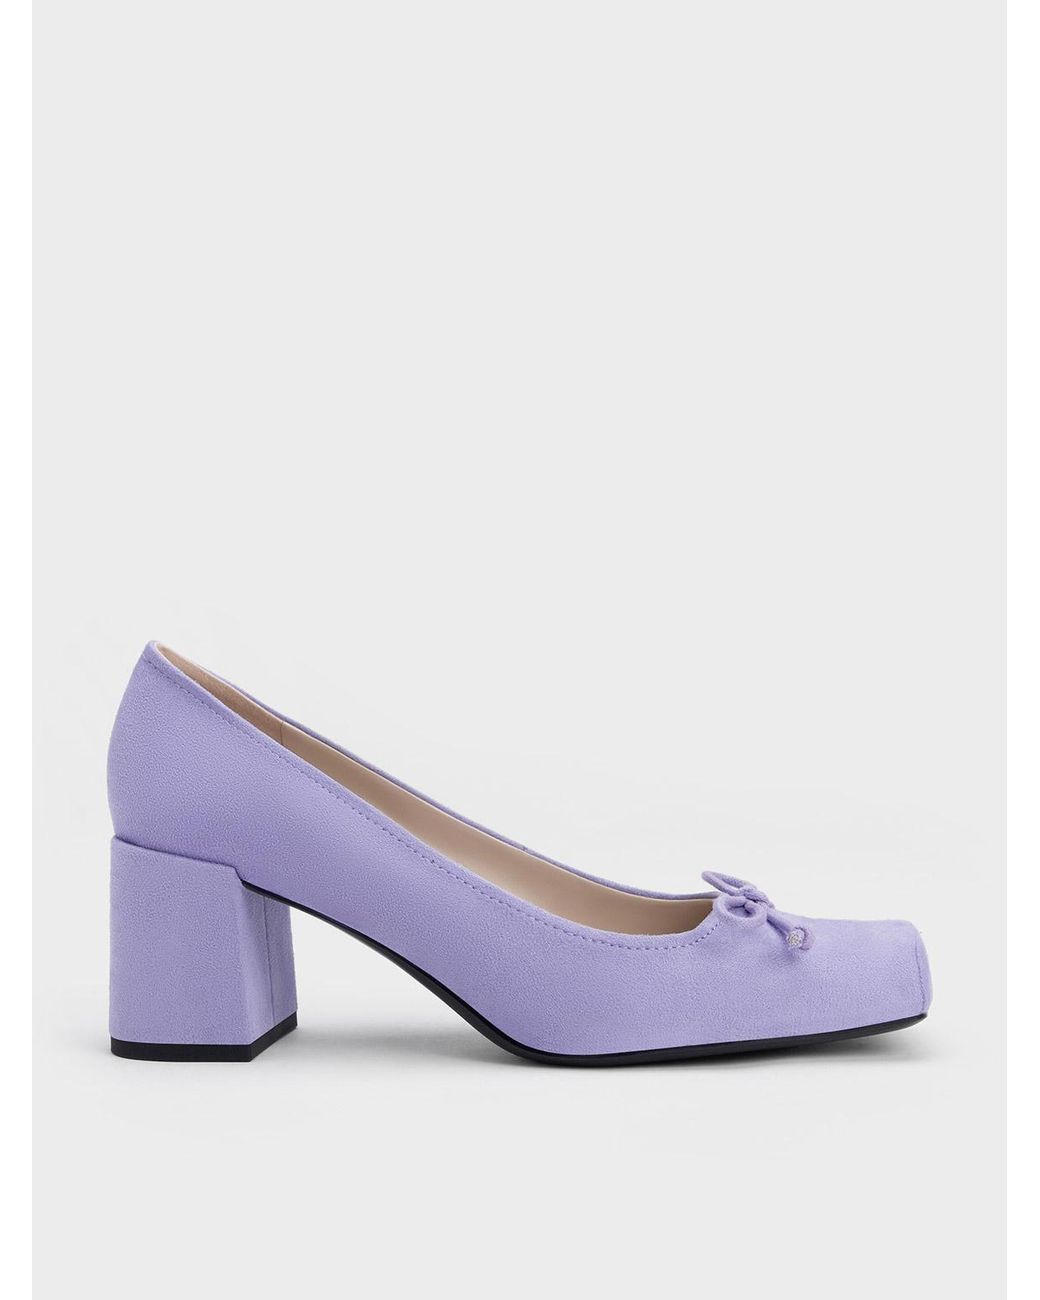 Charles & Keith Bow Square-toe Textured Pumps in Purple